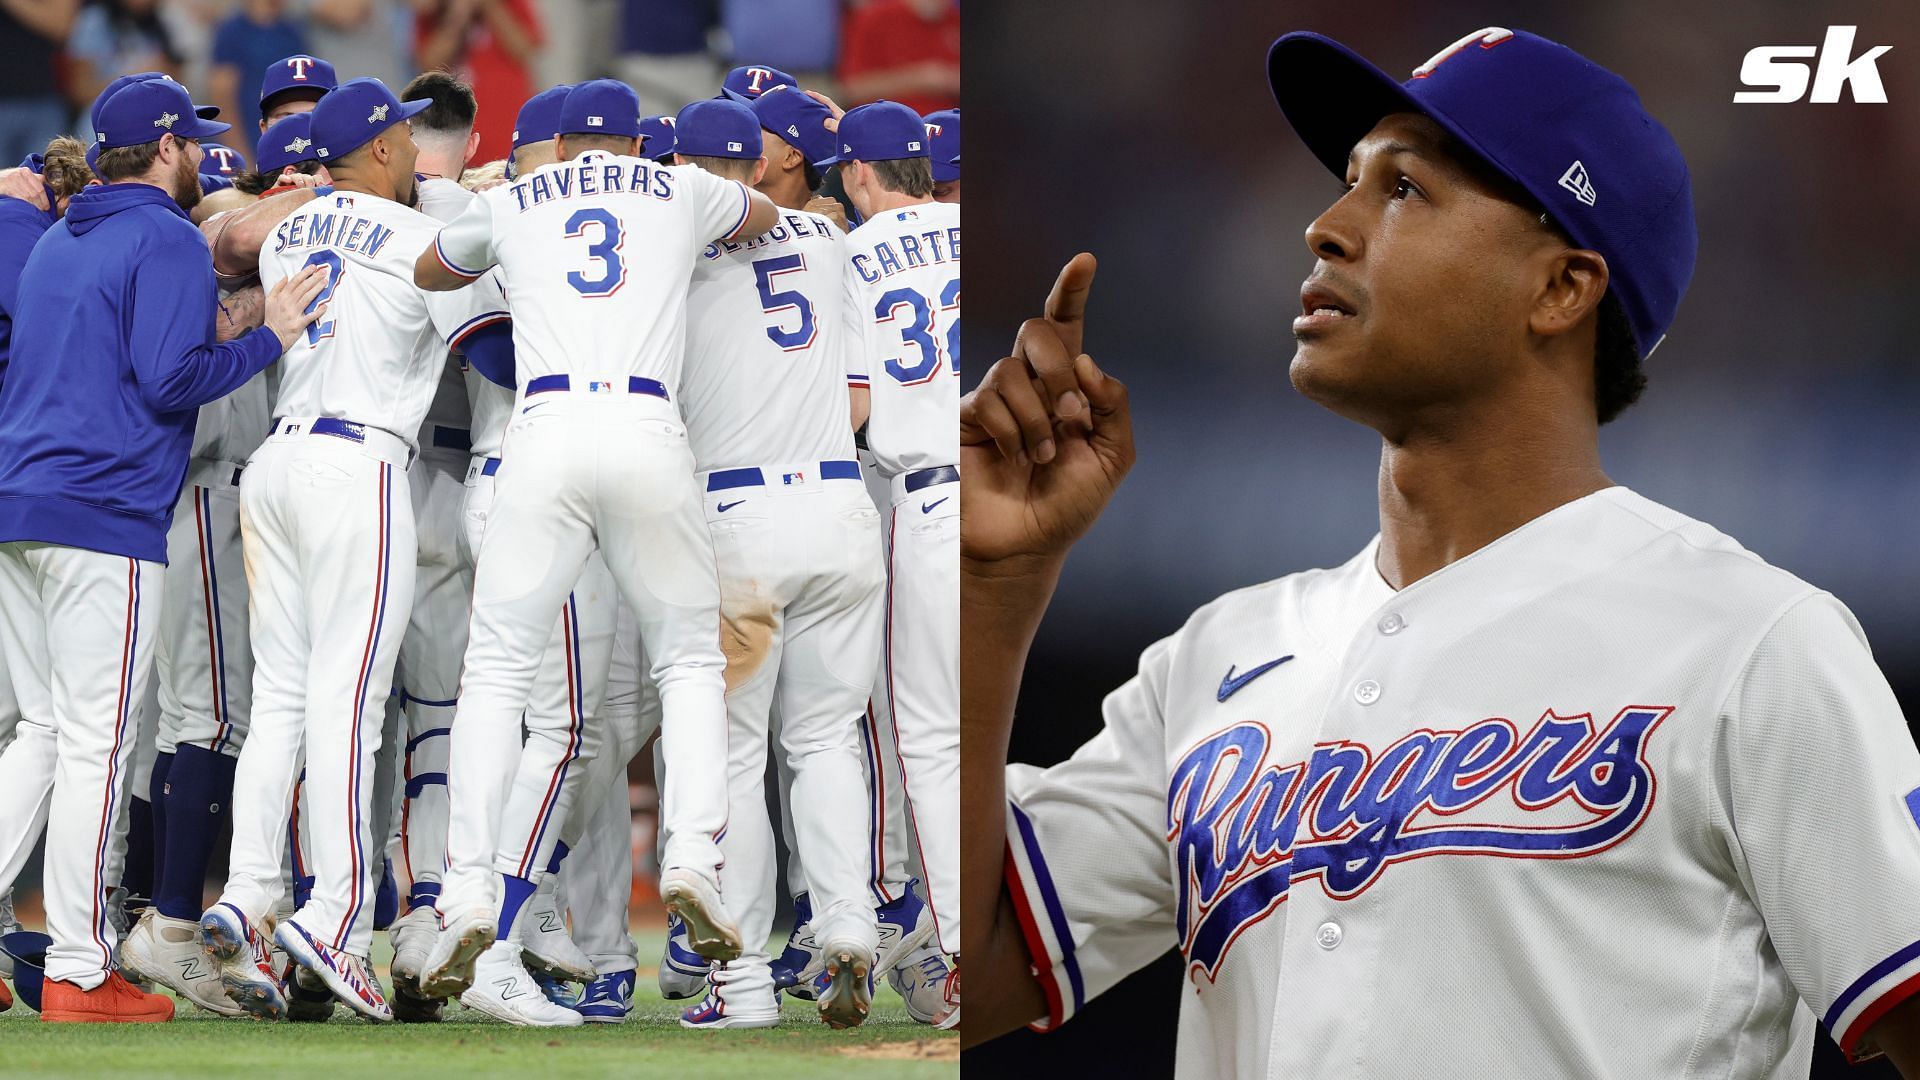 MLB Playoffs: Who is the face of baseball?